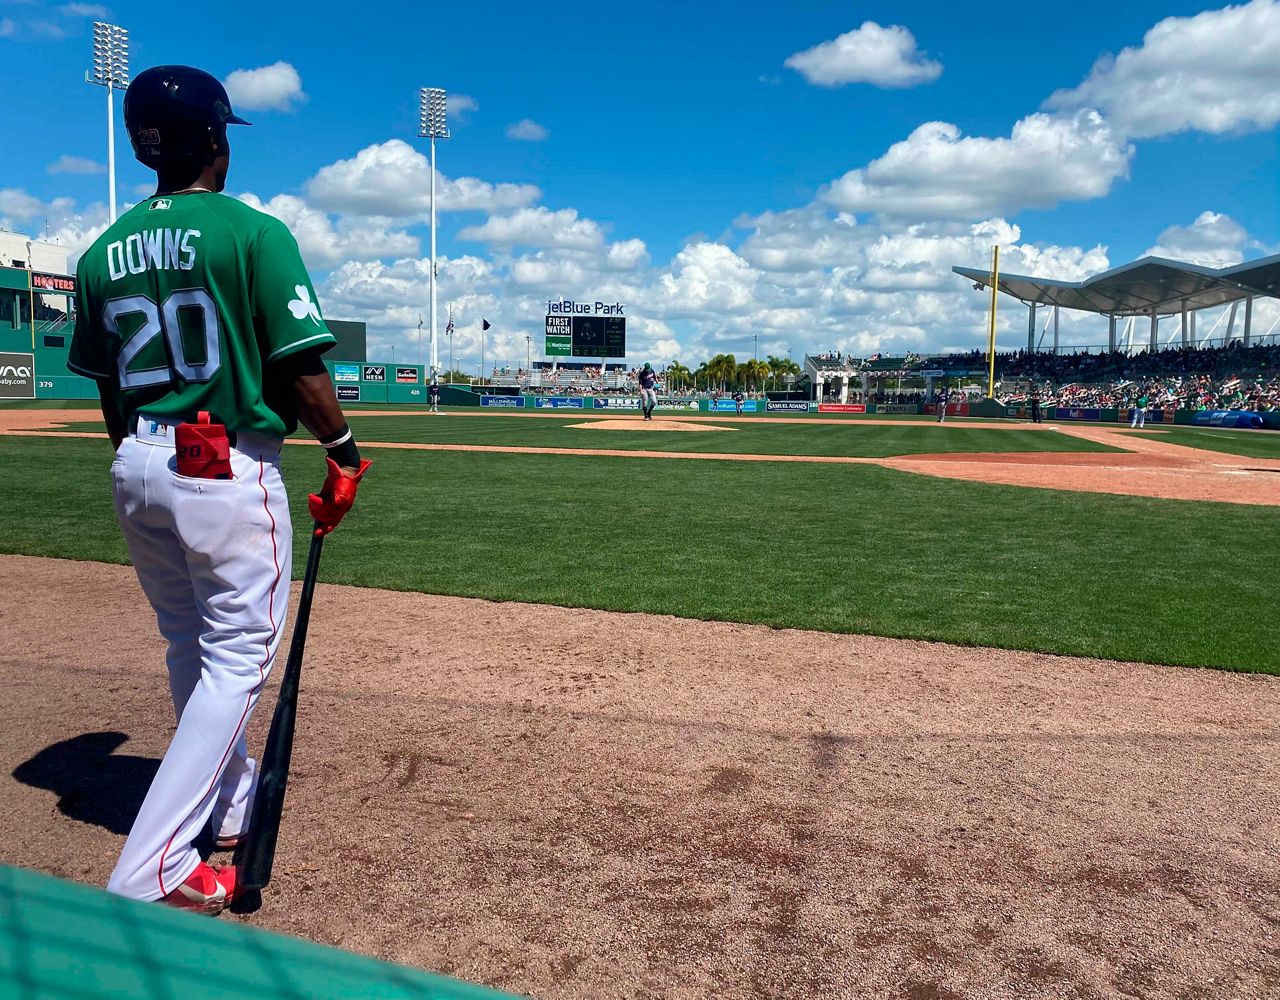 Boston Red Sox Spring Training 2022 Tickets Go On Sale